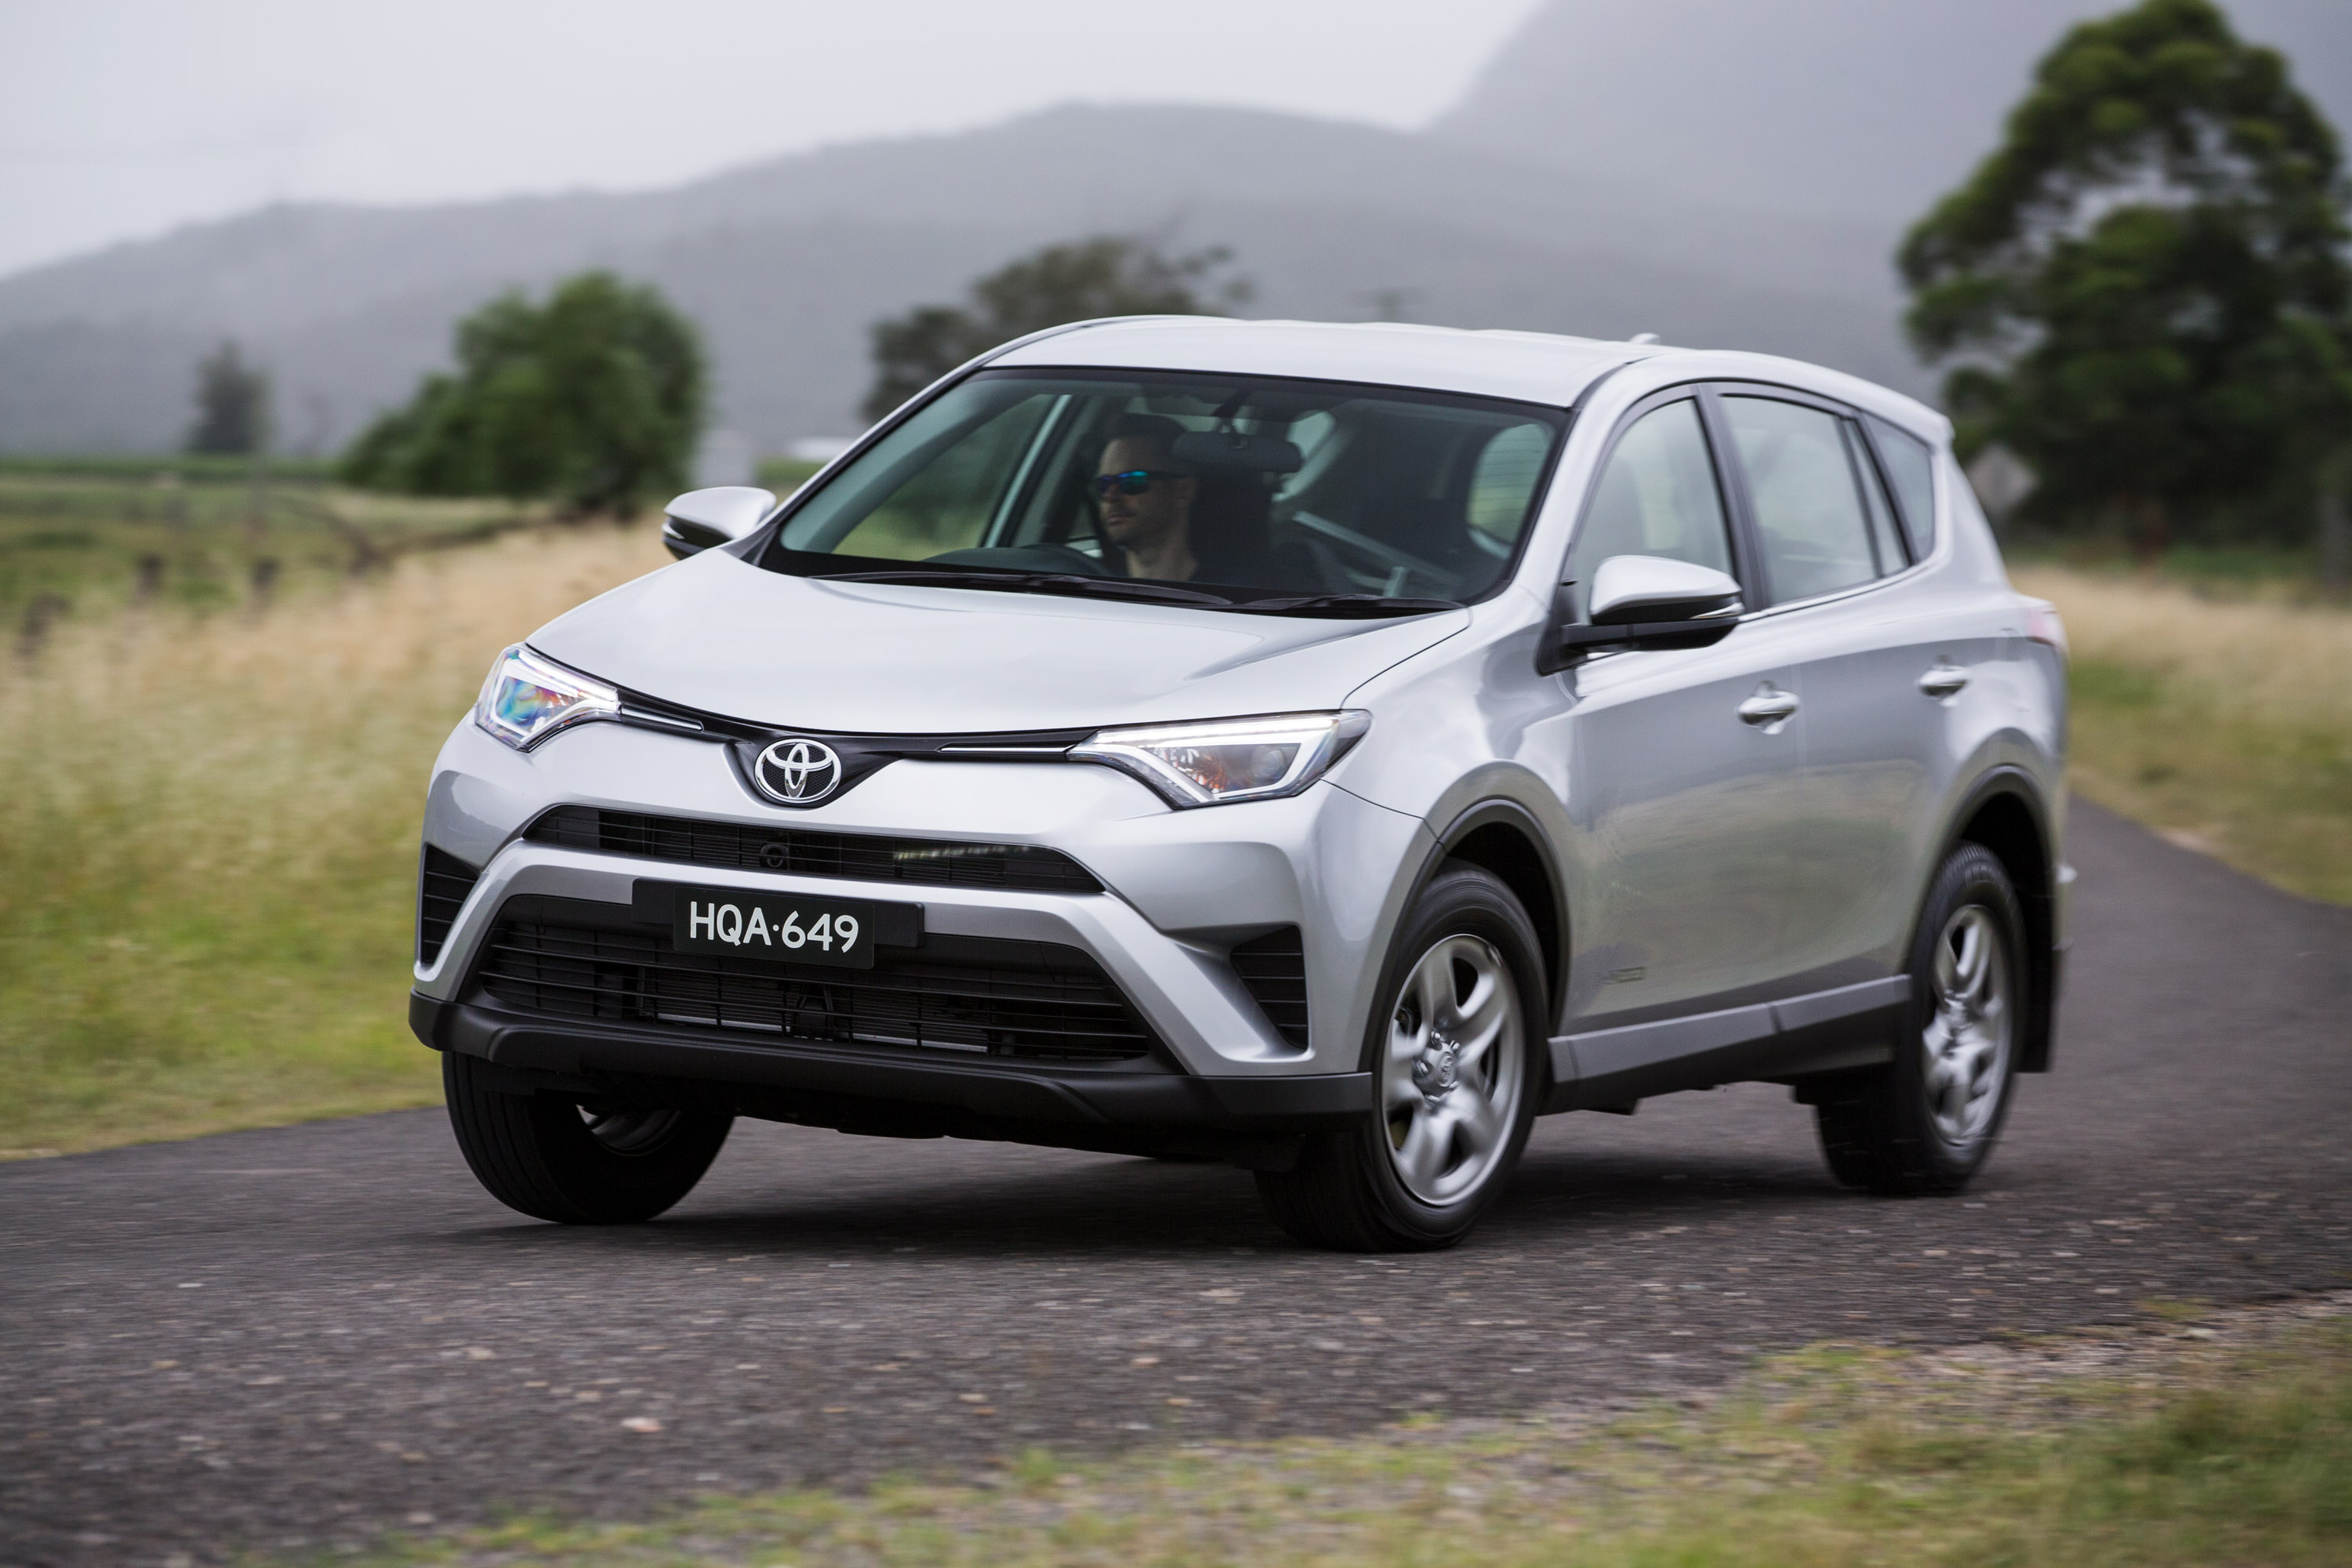 2016 Toyota RAV4 pricing and specifications photos CarAdvice